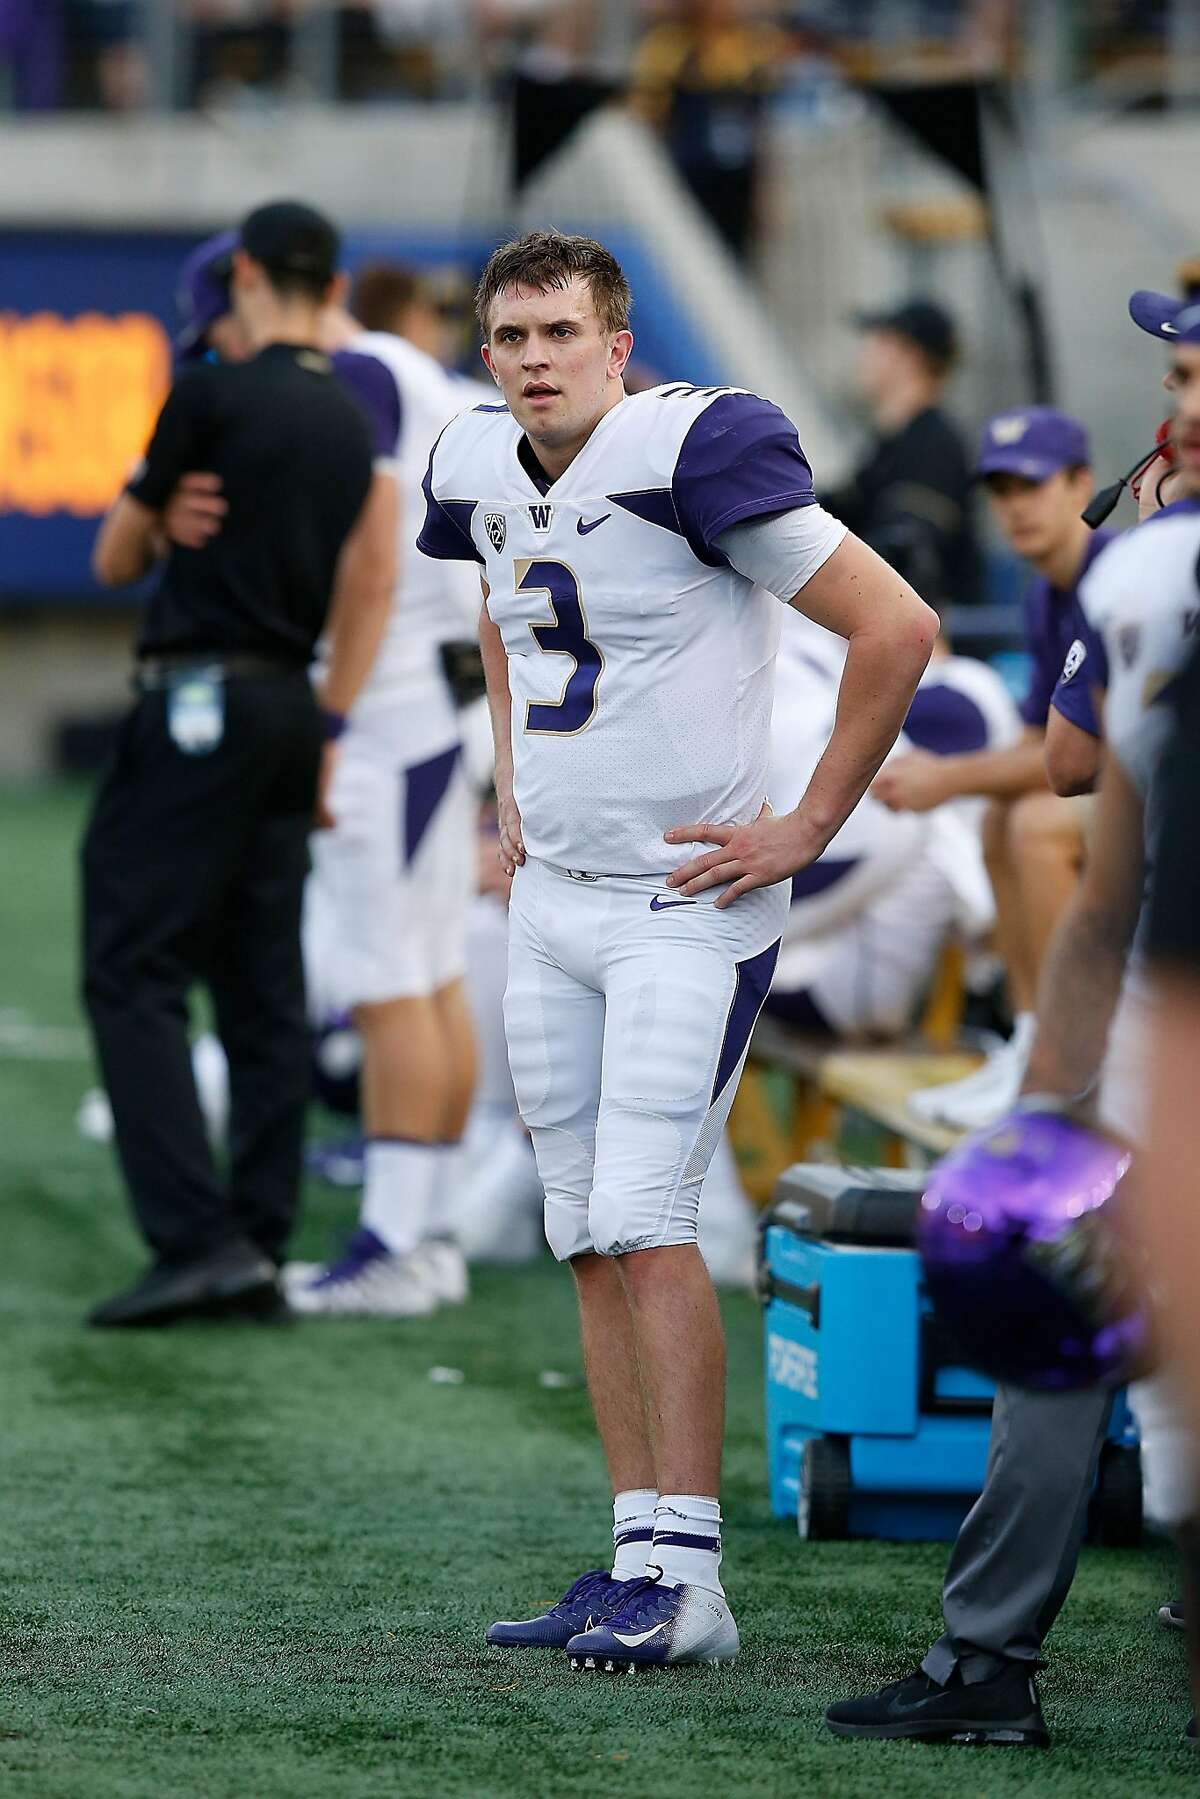 BERKELEY, CA - OCTOBER 27: Quarterback Jake Browning #3 of the Washington Huskies looks on from the sideline during the third quarter of the game against the California Golden Bears at California Memorial Stadium on October 27, 2018 in Berkeley, California. (Photo by Lachlan Cunningham/Getty Images)